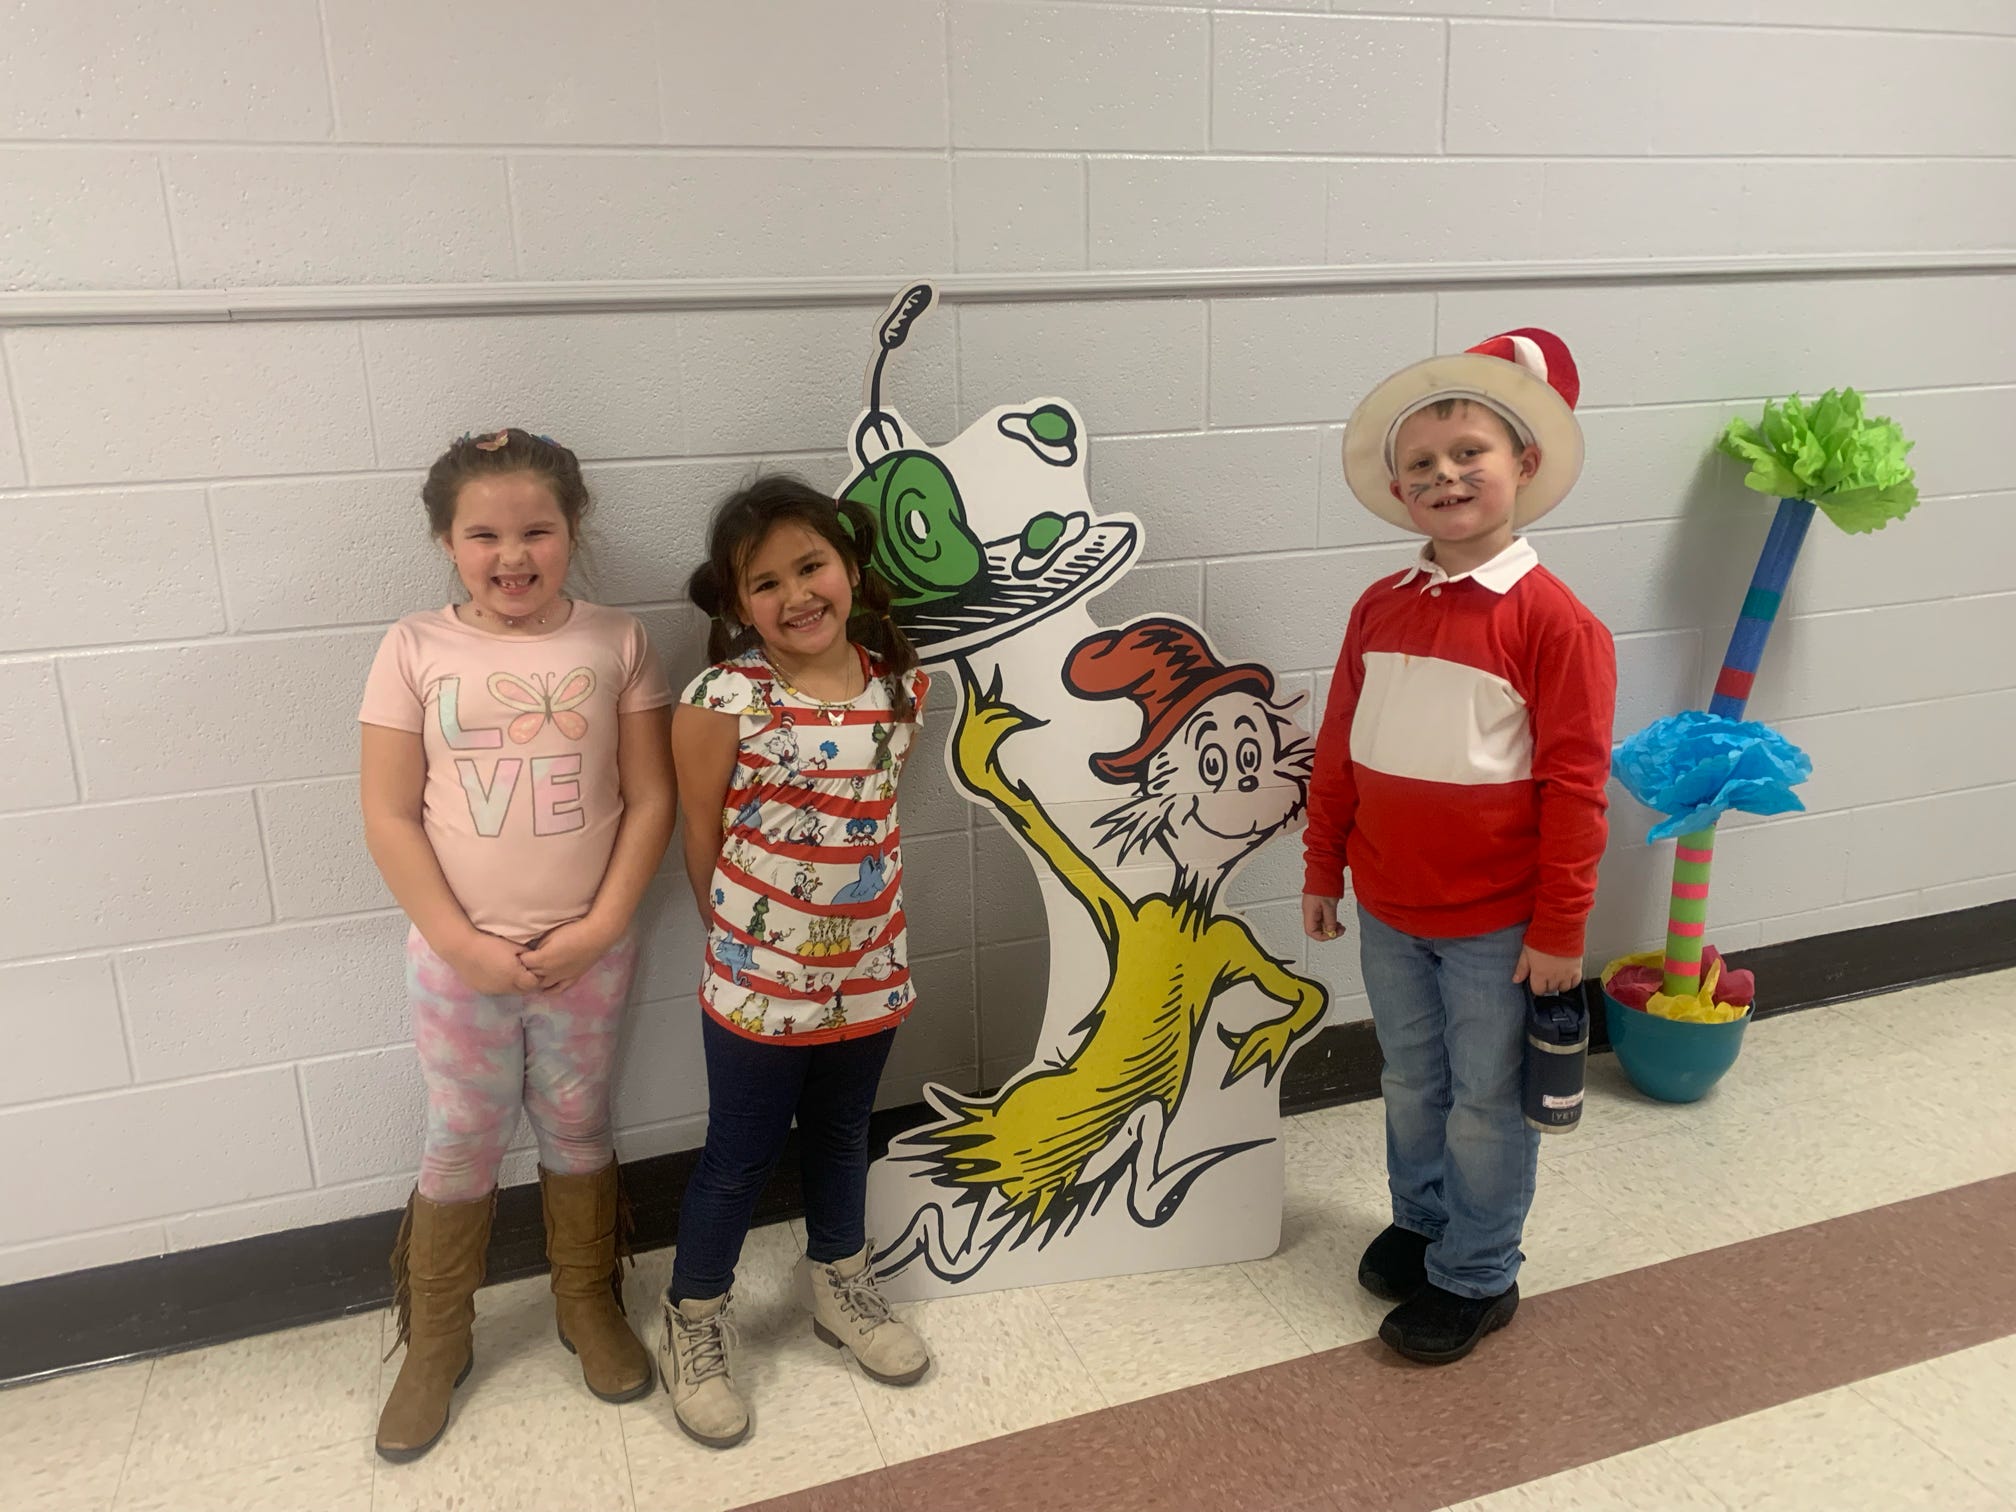 The Cat in the Hat Thursday: Students wore crazy hats or crazy hair to celebrate Read Across America Week.